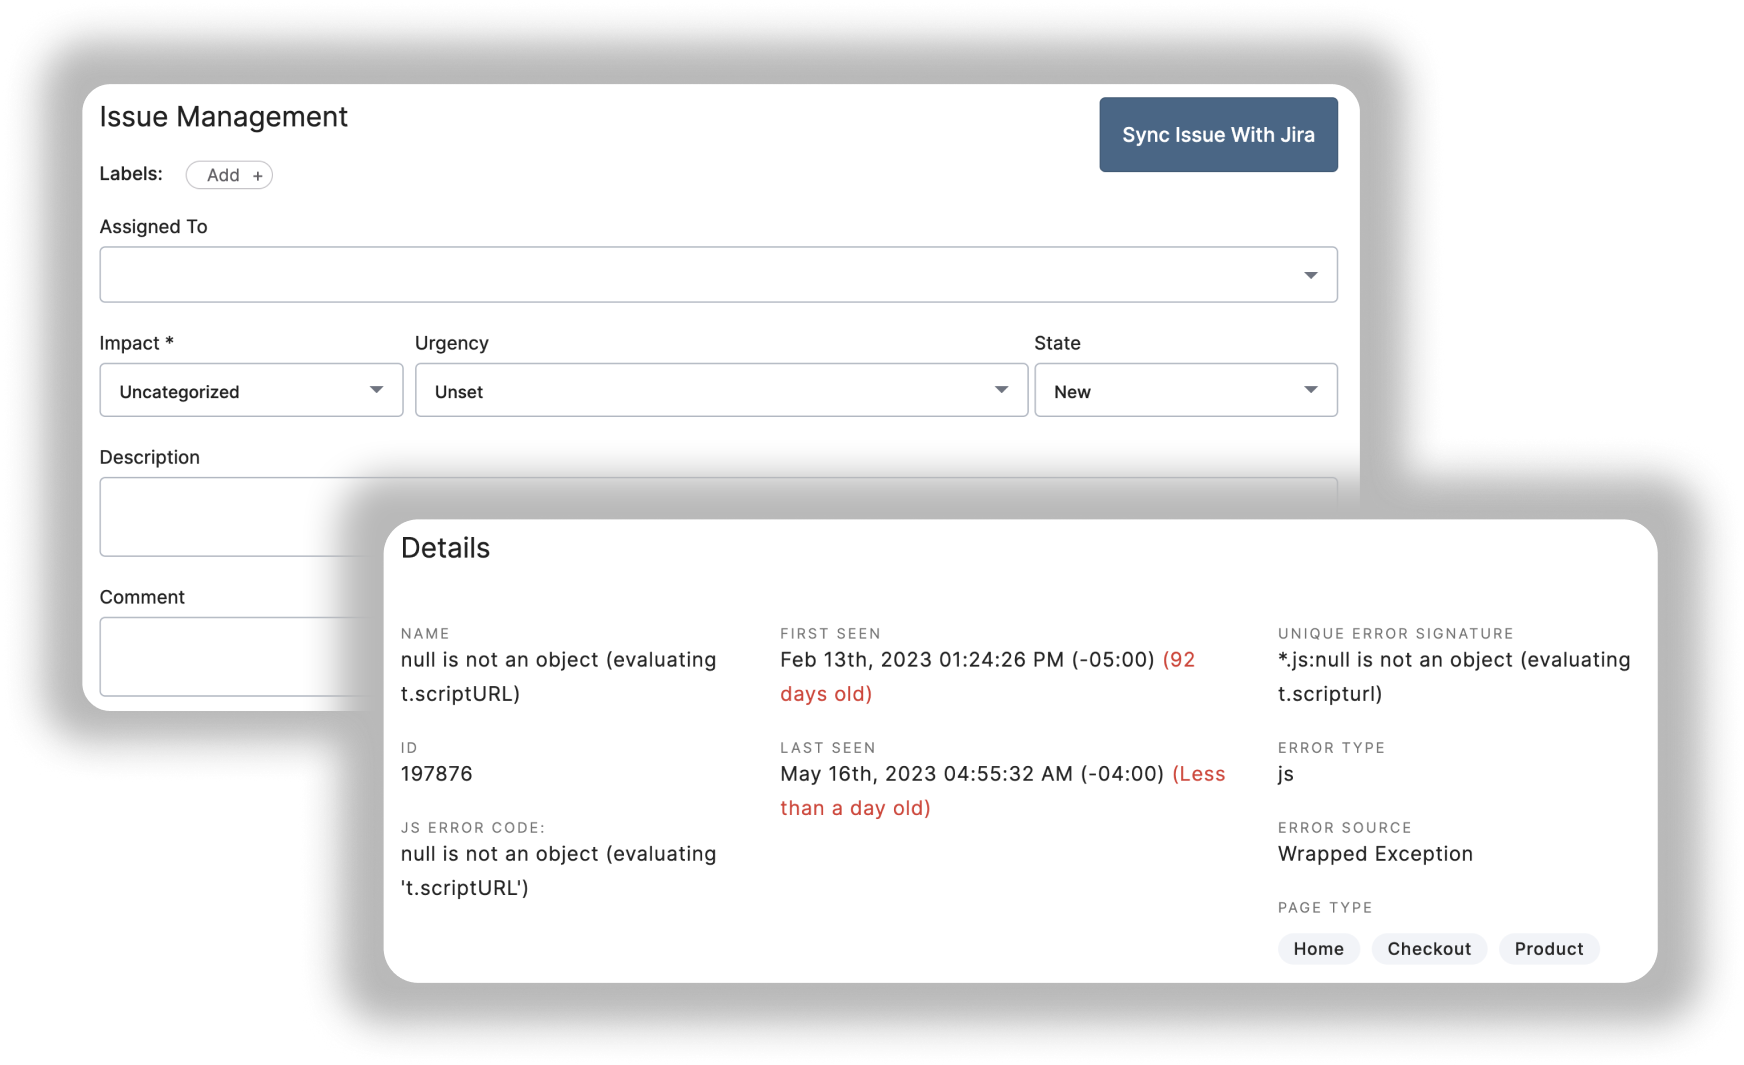 Triage tickets directly in the platform and sync with Jira all at once. Custom tags allow you to organize and manage issues for easy reference, and sharing capabilities make it easy to work with external partners.